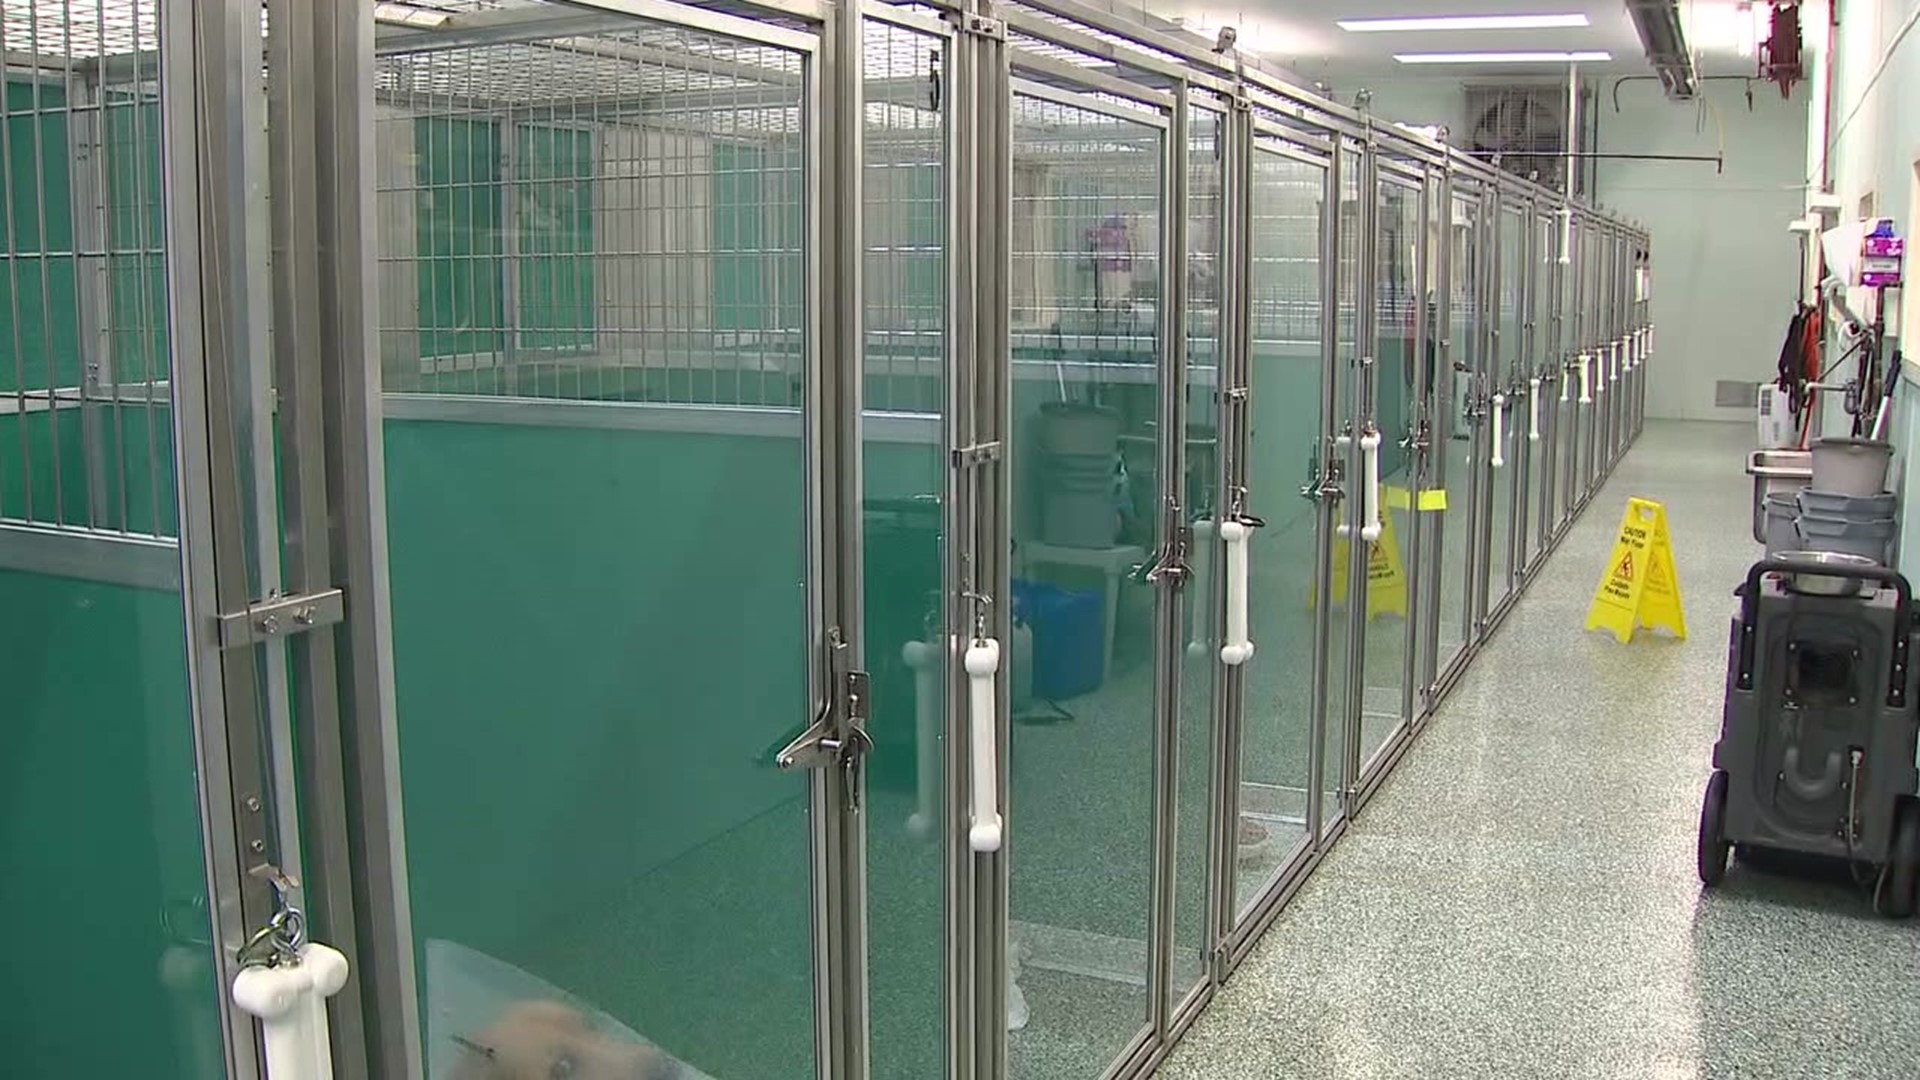 The shelter renovated the inside kennel house area for the first time since taking the facility over from the SPCA decades ago.